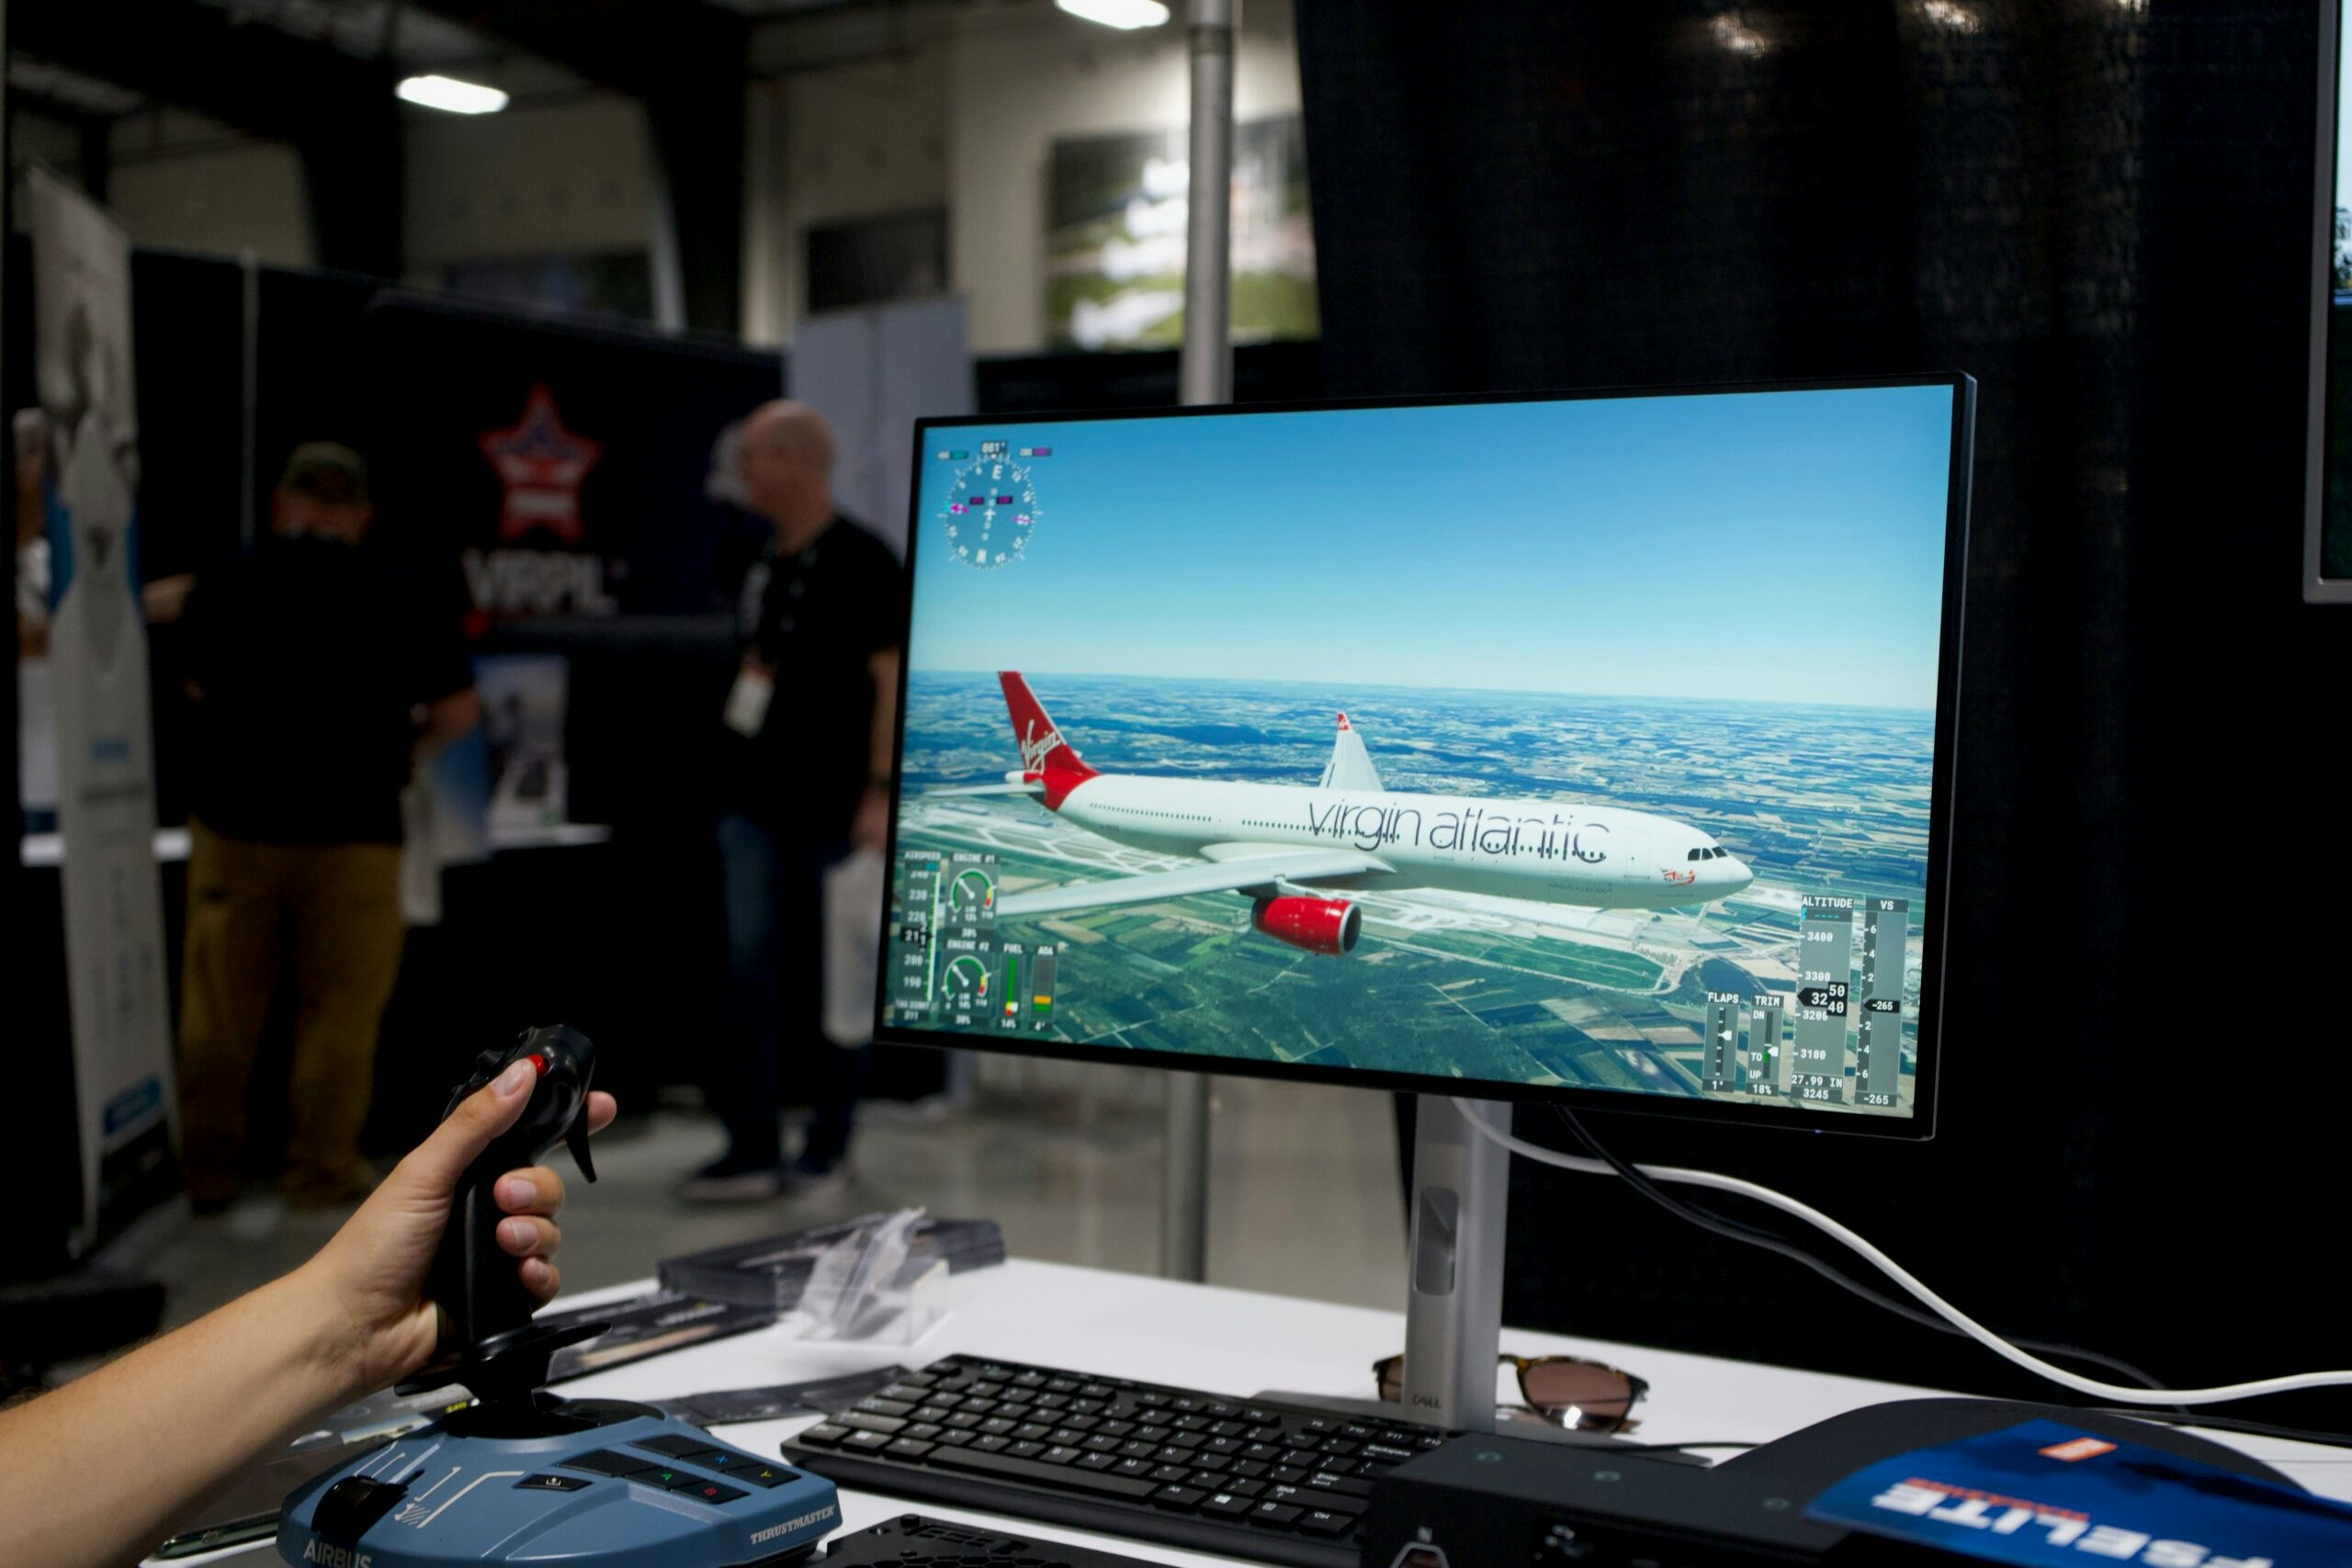 Hands-on with Aerosoft's A330